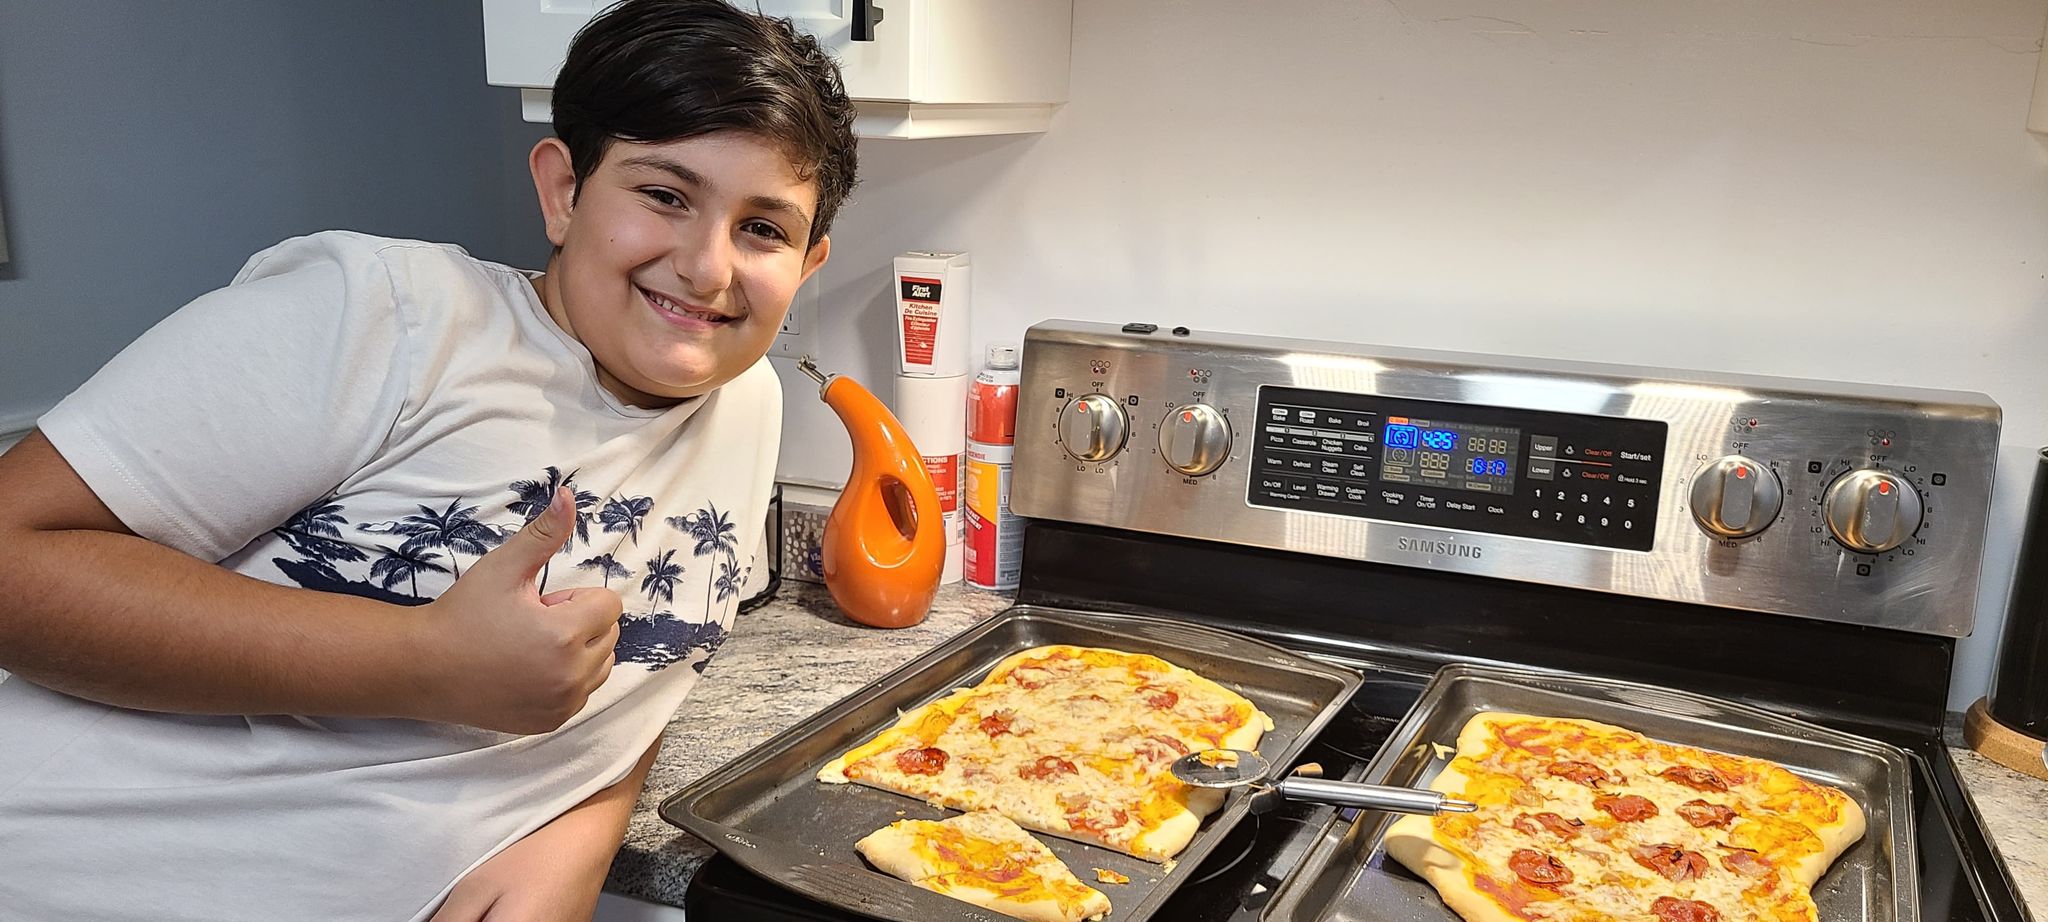 Student smiles with his pizza creation